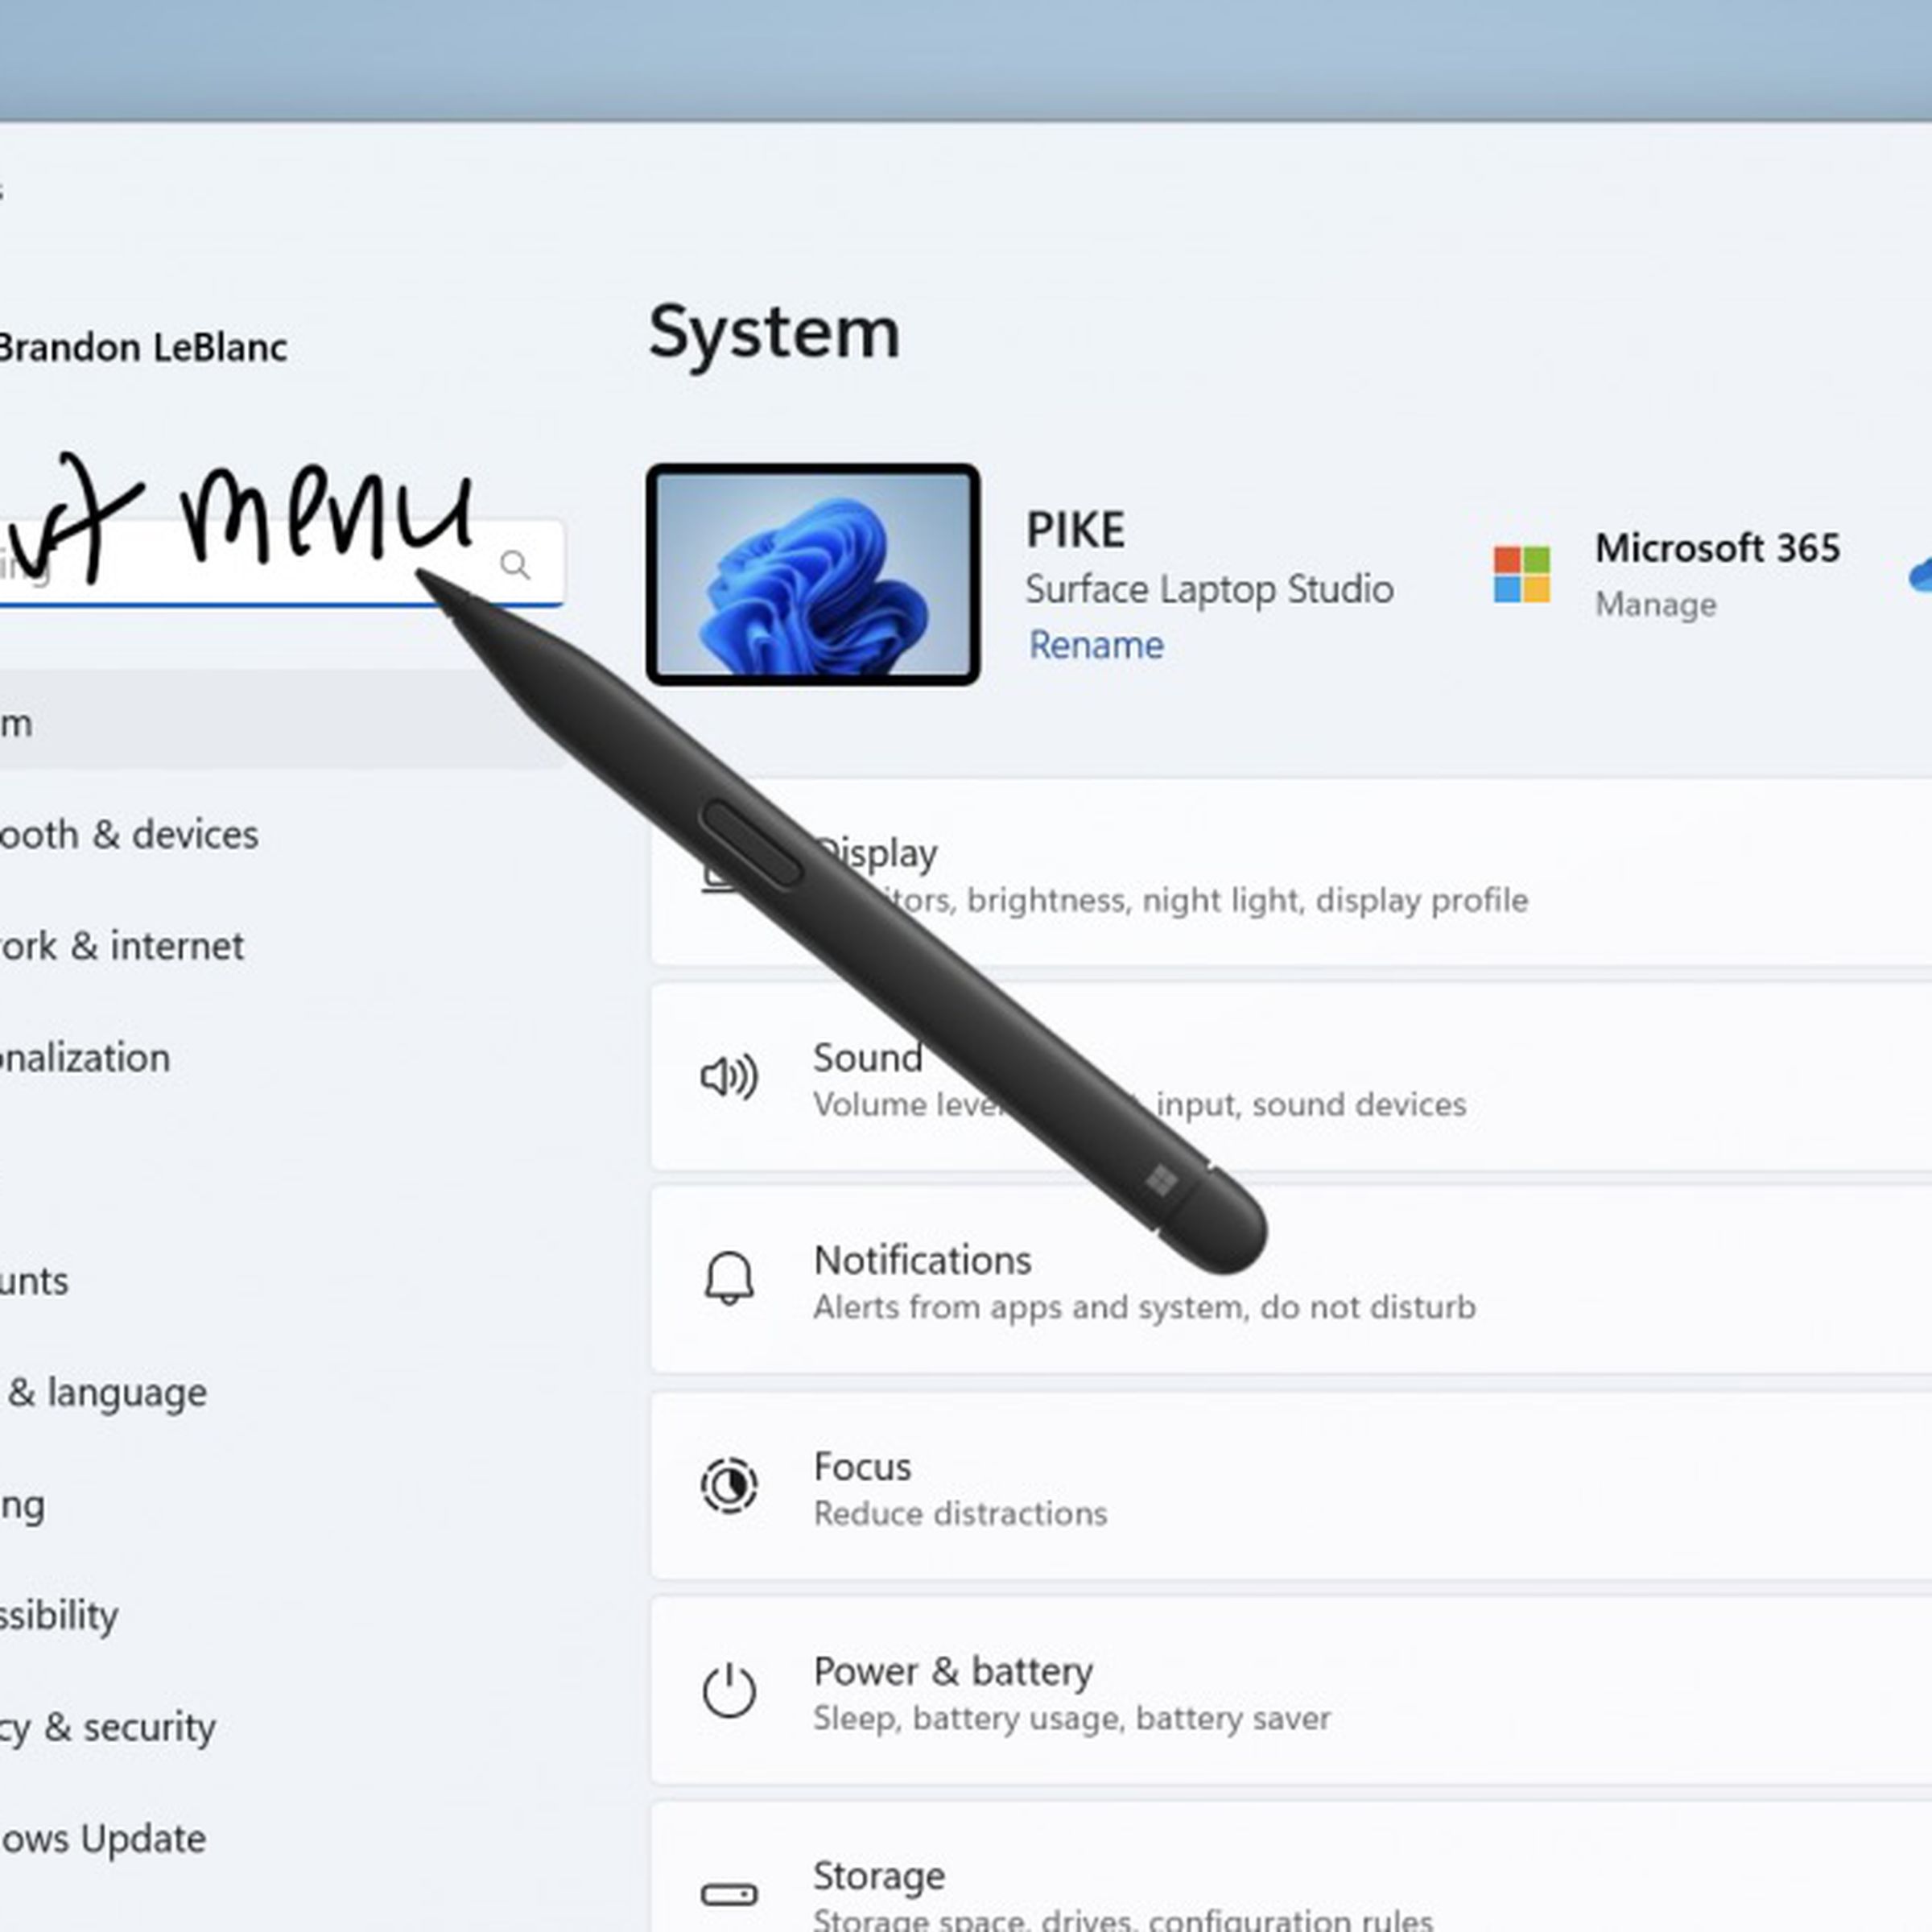 Windows 11 settings screen with a floating stylus handwriting “start menu” in the find field.